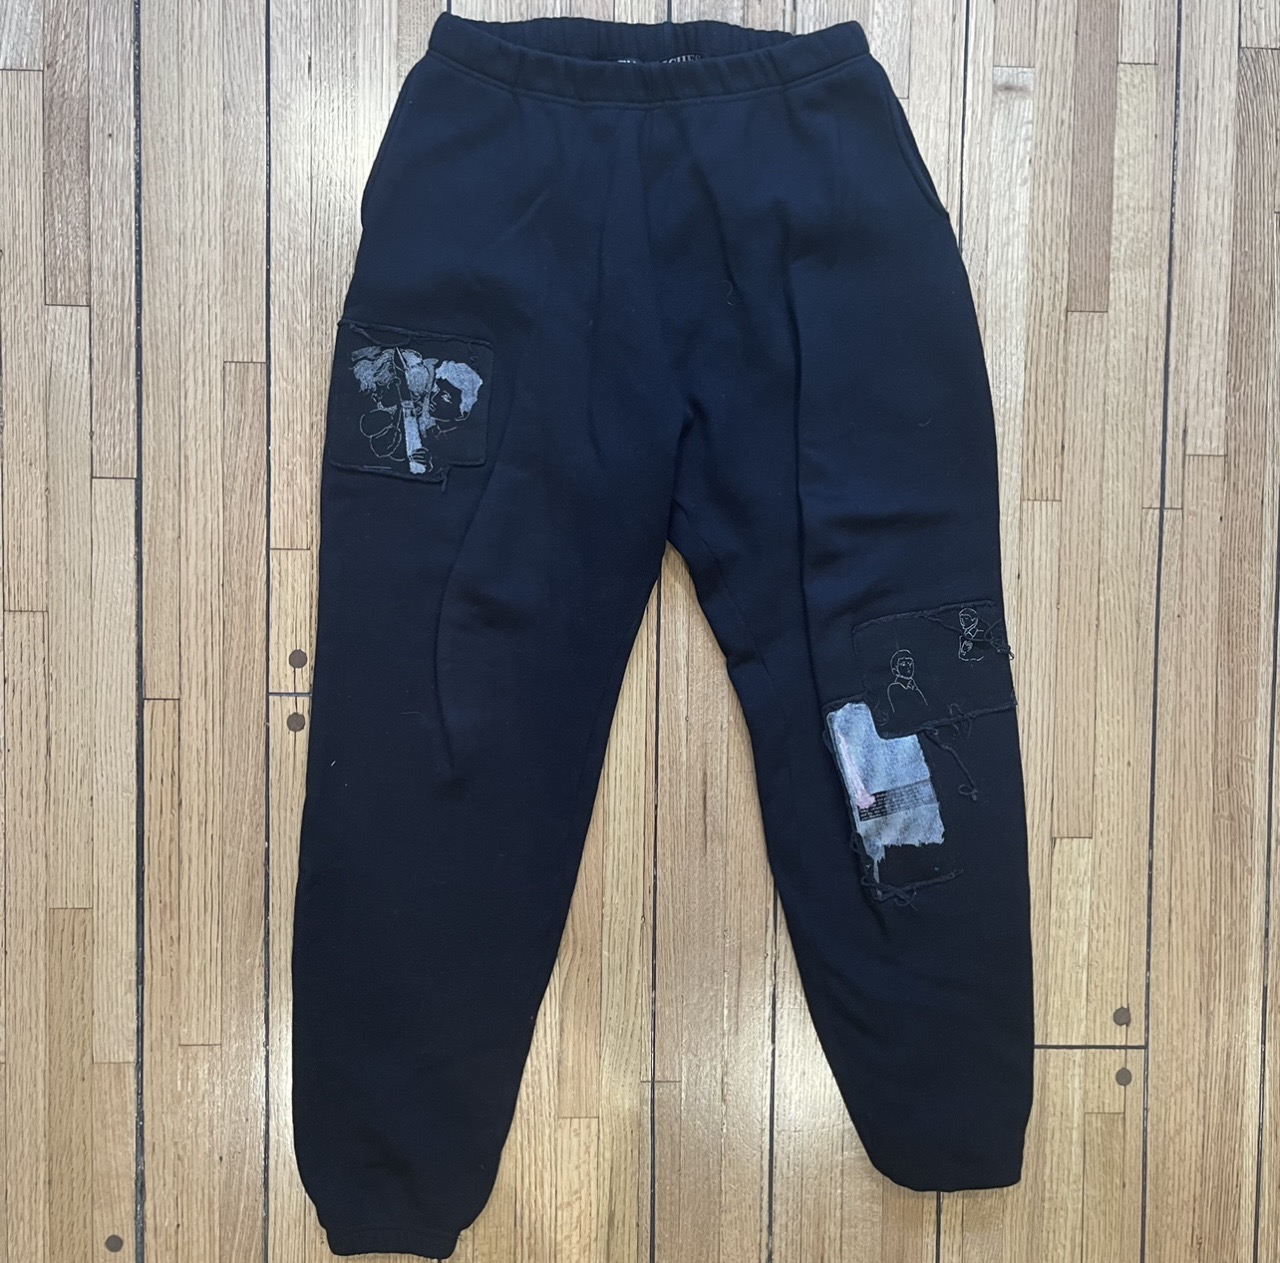 RARE FW20 ERD Embroidered Patch Sweatpants - 1